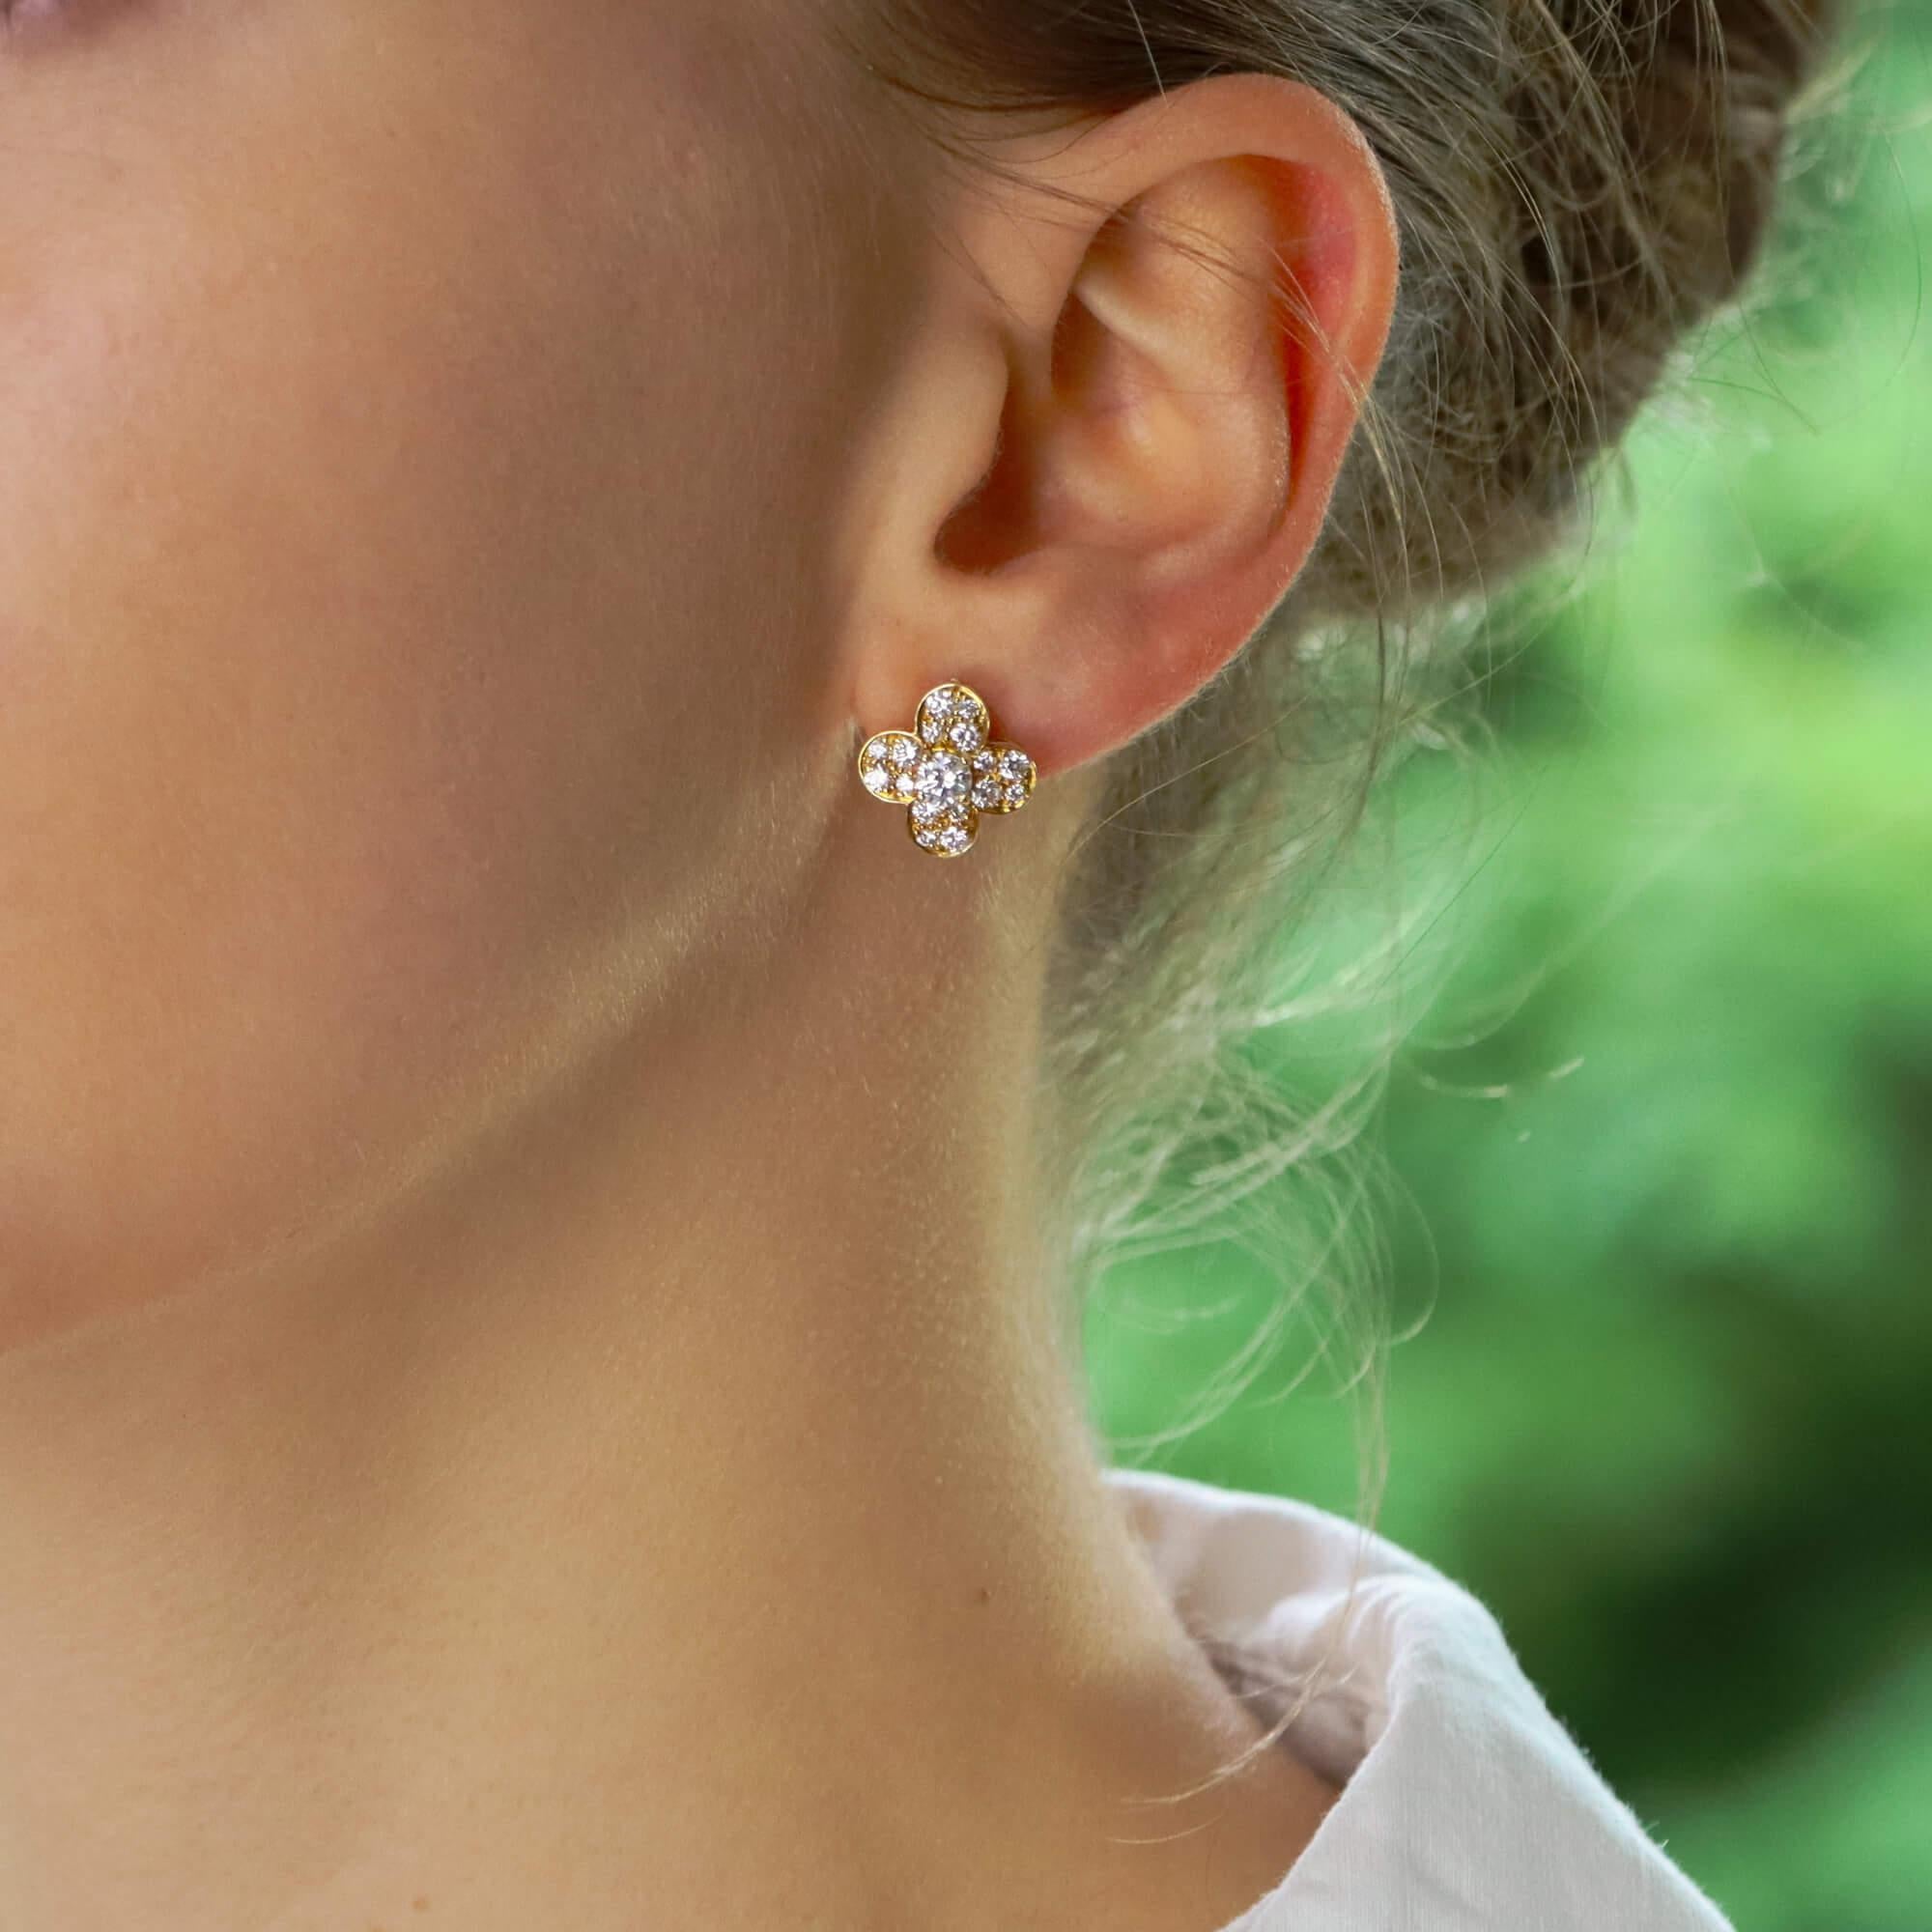  A beautiful pair of vintage Van Cleef and Arpels Trefle diamond earrings set in 18k yellow gold.

Each earring depicts the iconic Van Cleef clover motif, also referred to as the Trefle design. Each earring is set centrally with a sparkly round